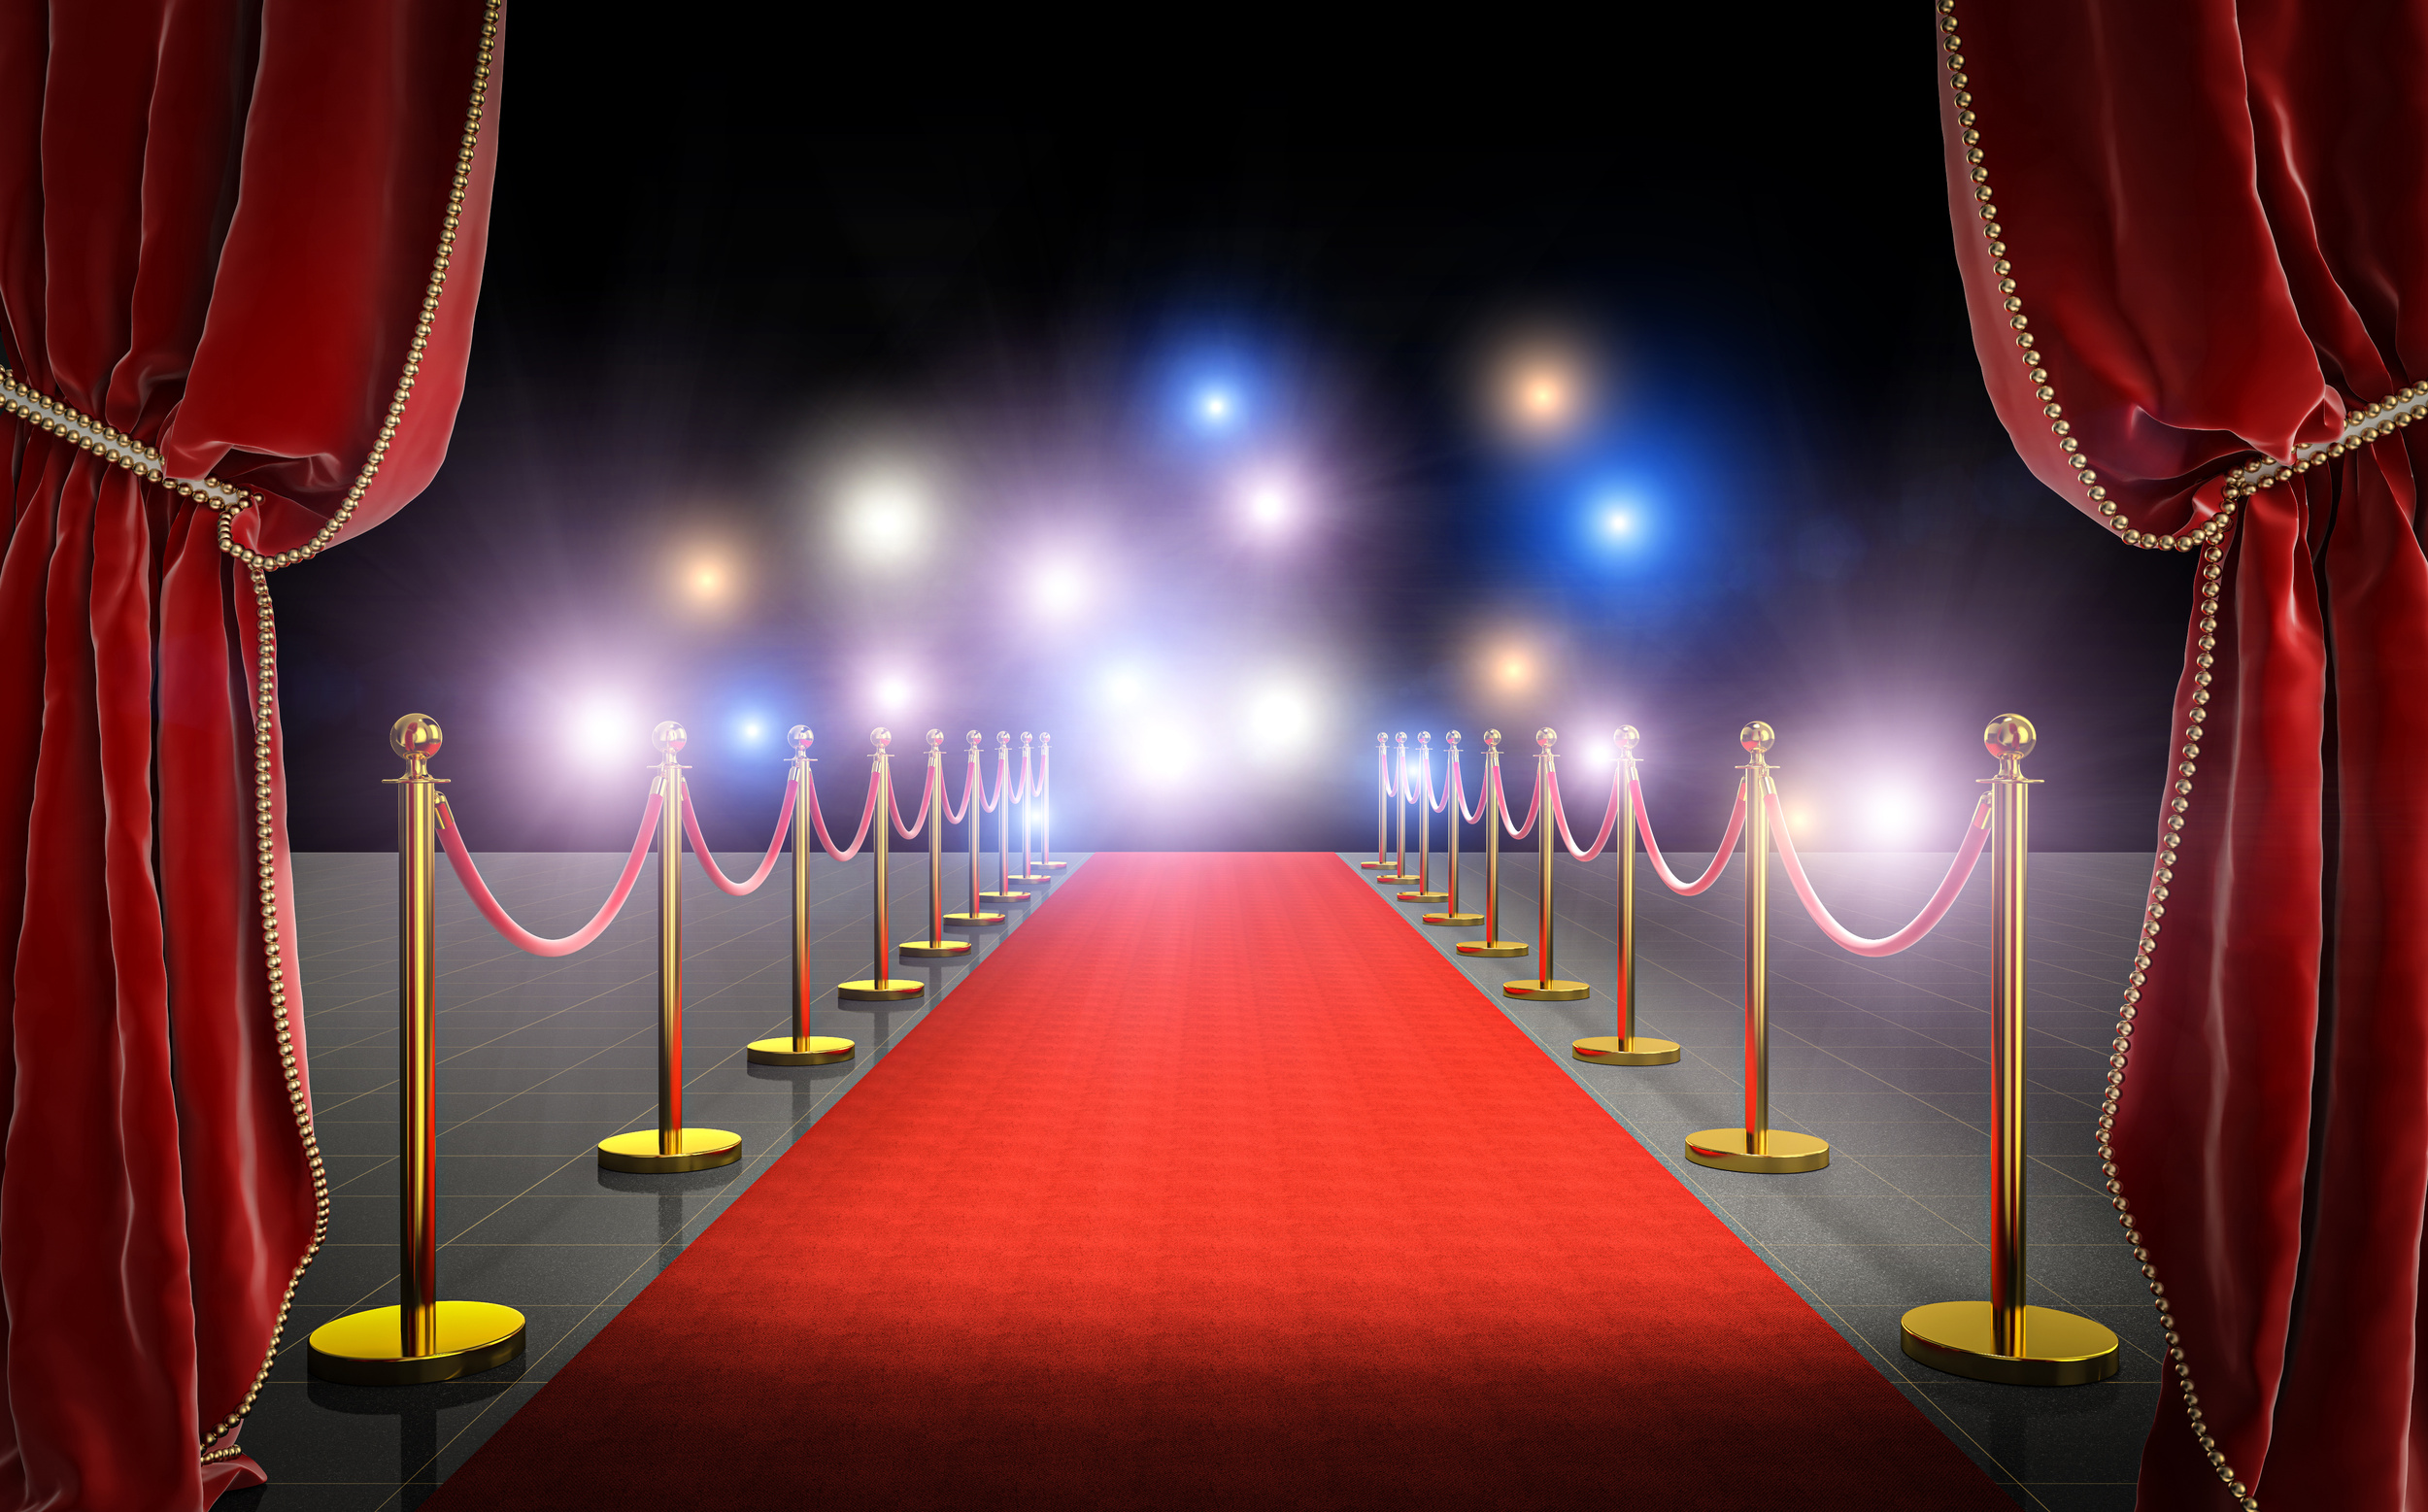 3D Image Render of a Red Carpet with Velvet Curtains and Flash I